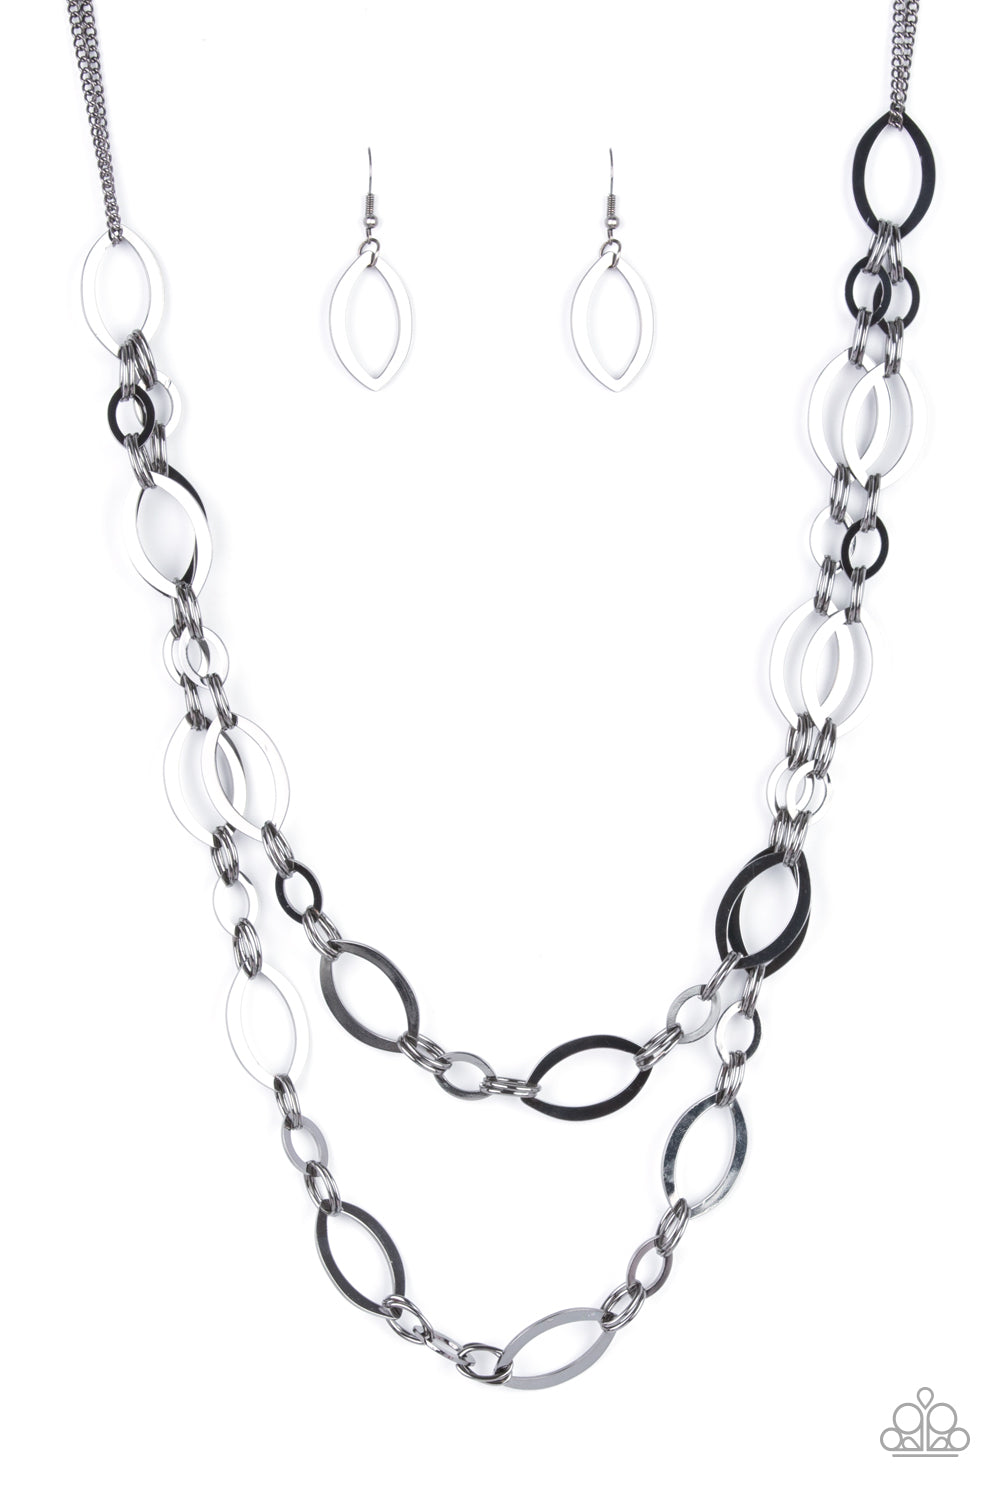 The OVAL-achiever - black - Paparazzi necklace